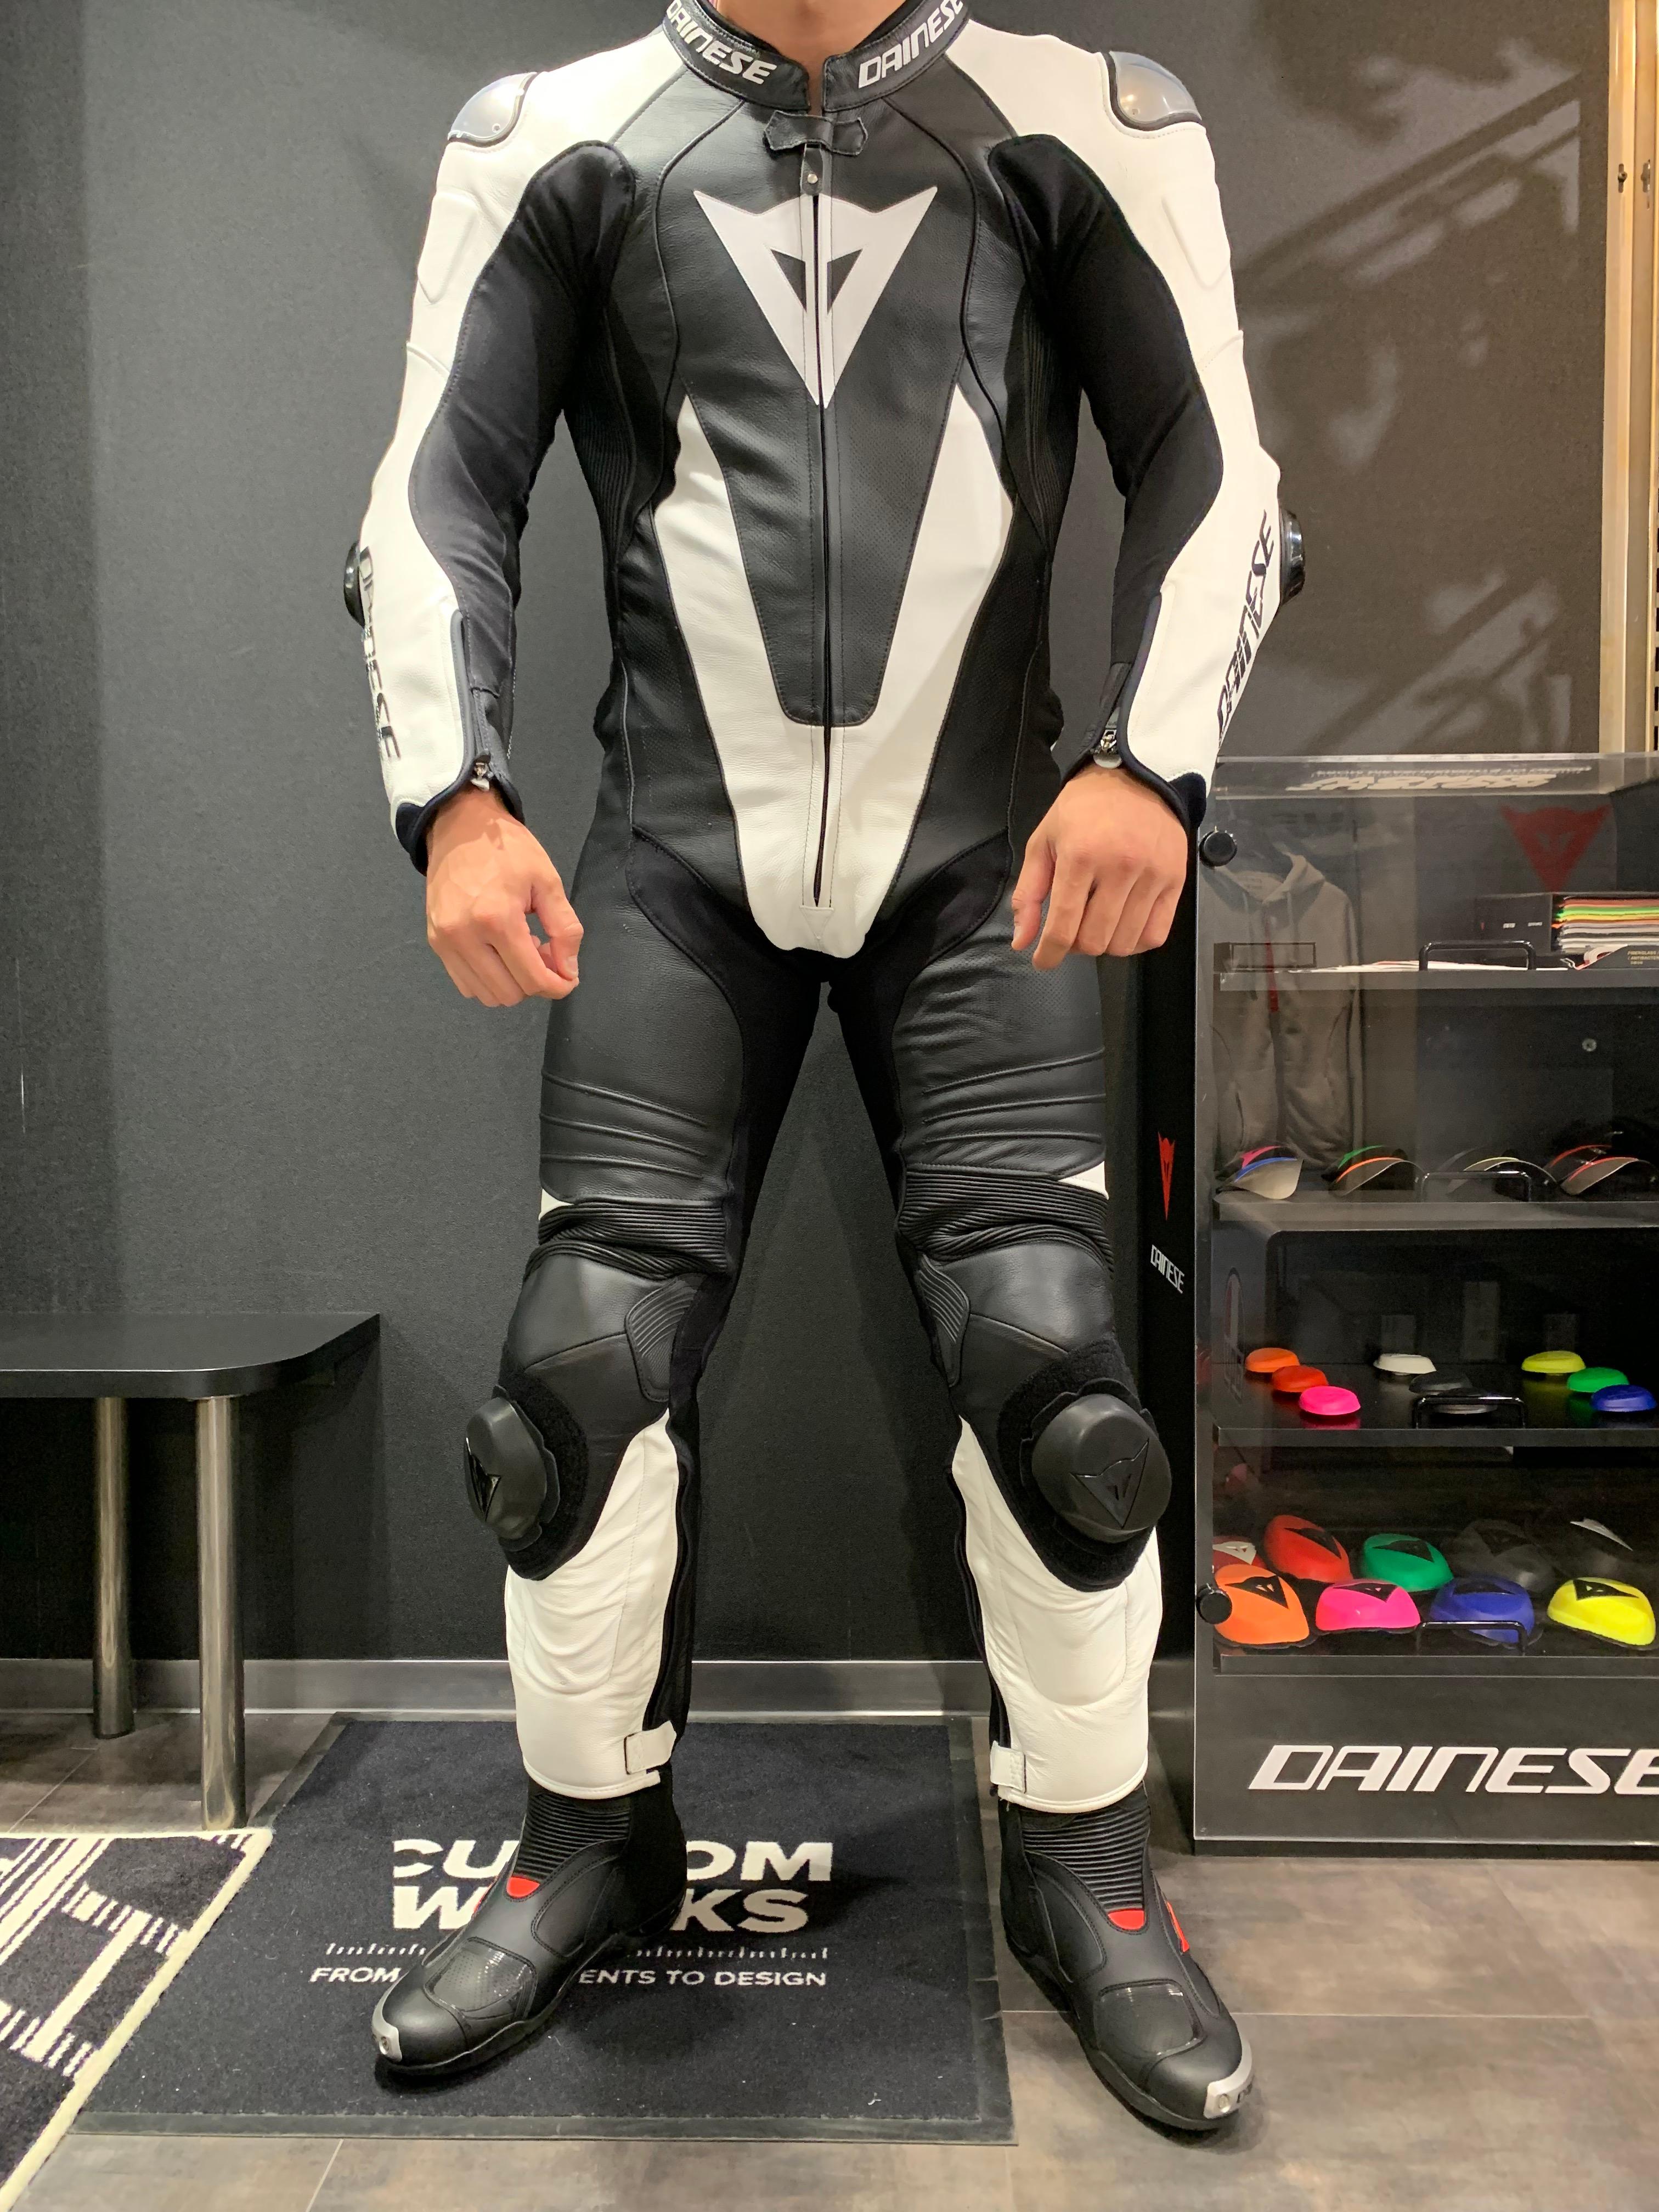 OUTLET 包装 即日発送 代引無料 ダイネーゼ Dainese レーシングスーツ